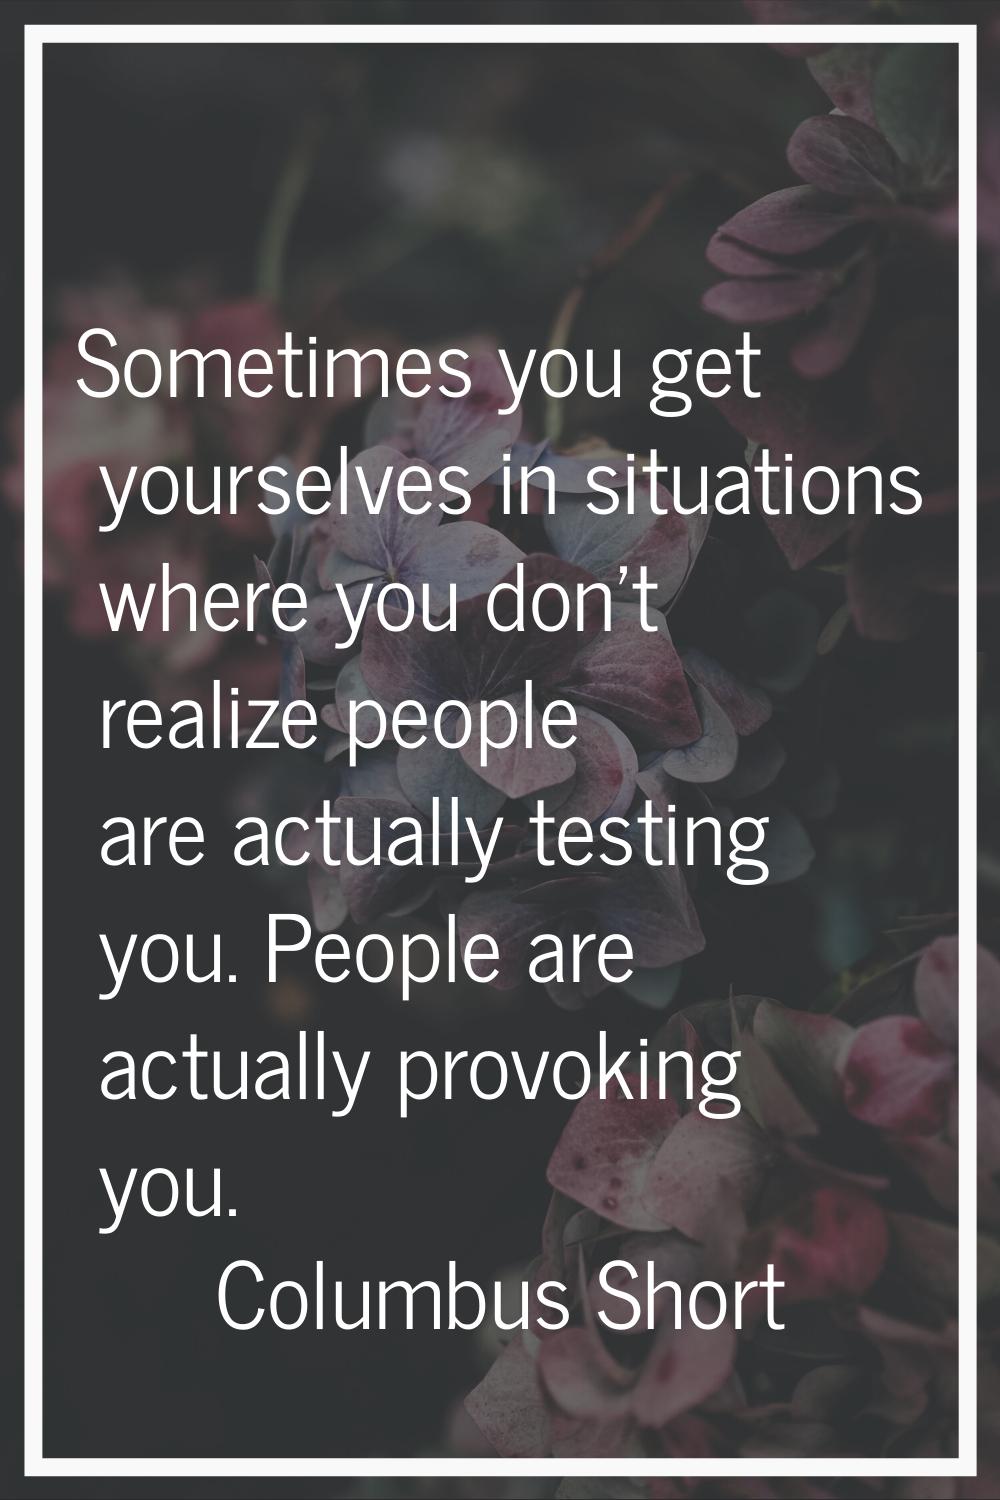 Sometimes you get yourselves in situations where you don't realize people are actually testing you.